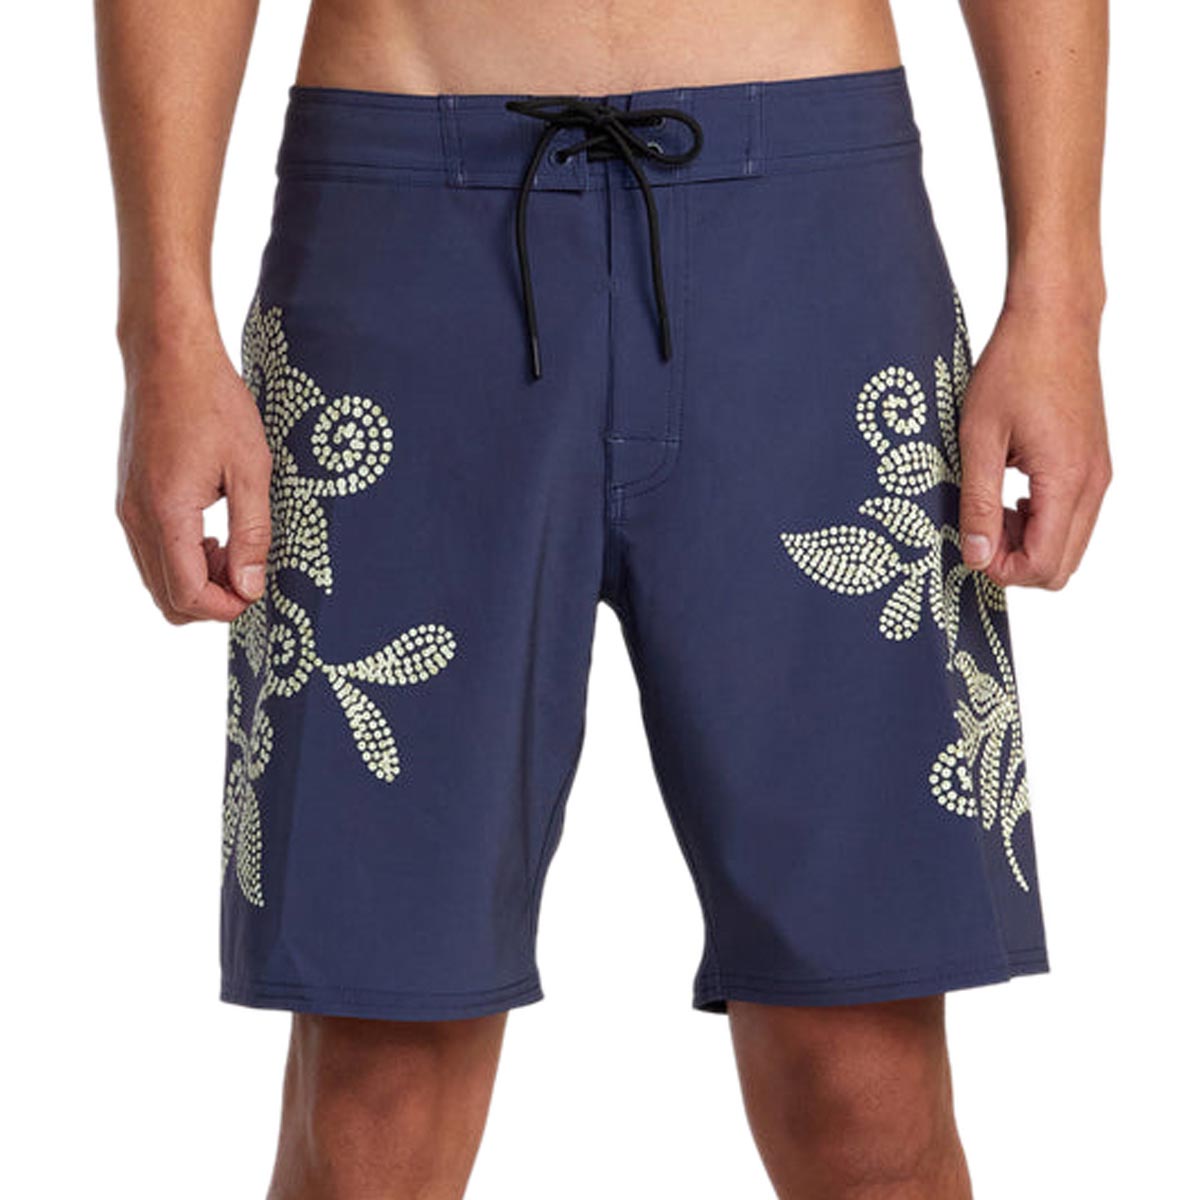 RVCA Displaced Board Shorts - Moody Blue image 2